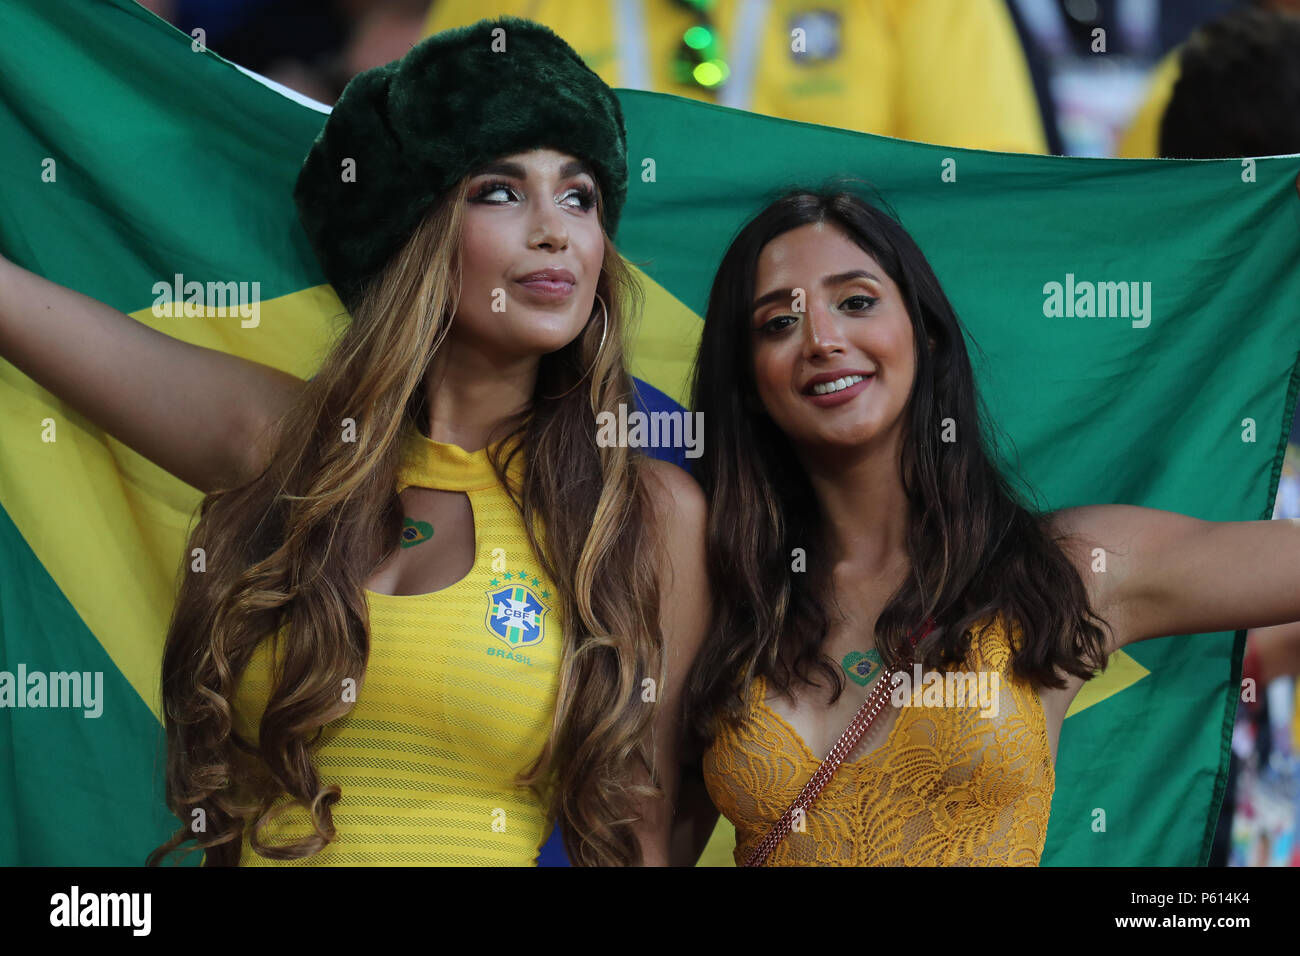 Brazil Fans SERBIA V BRAZIL SERBIA V BRAZIL, 2018 FIFA WORLD CUP RUSSIA 27 June 2018 GBC8949 2018 FIFA World Cup Russia Spartak Stadium Moscow STRICTLY EDITORIAL USE ONLY. If The Player/Players Depicted In This Image Is/Are Playing For An English Club Or The England National Team. Then This Image May Only Be Used For Editorial Purposes. No Commercial Use. The Following Usages Are Also Restricted EVEN IF IN AN EDITORIAL CONTEXT: Use in conjuction with, or part of, any unauthorized audio, video, data, fixture lists, club/league logos, Betting, Games or any 'live' services. A Stock Photo